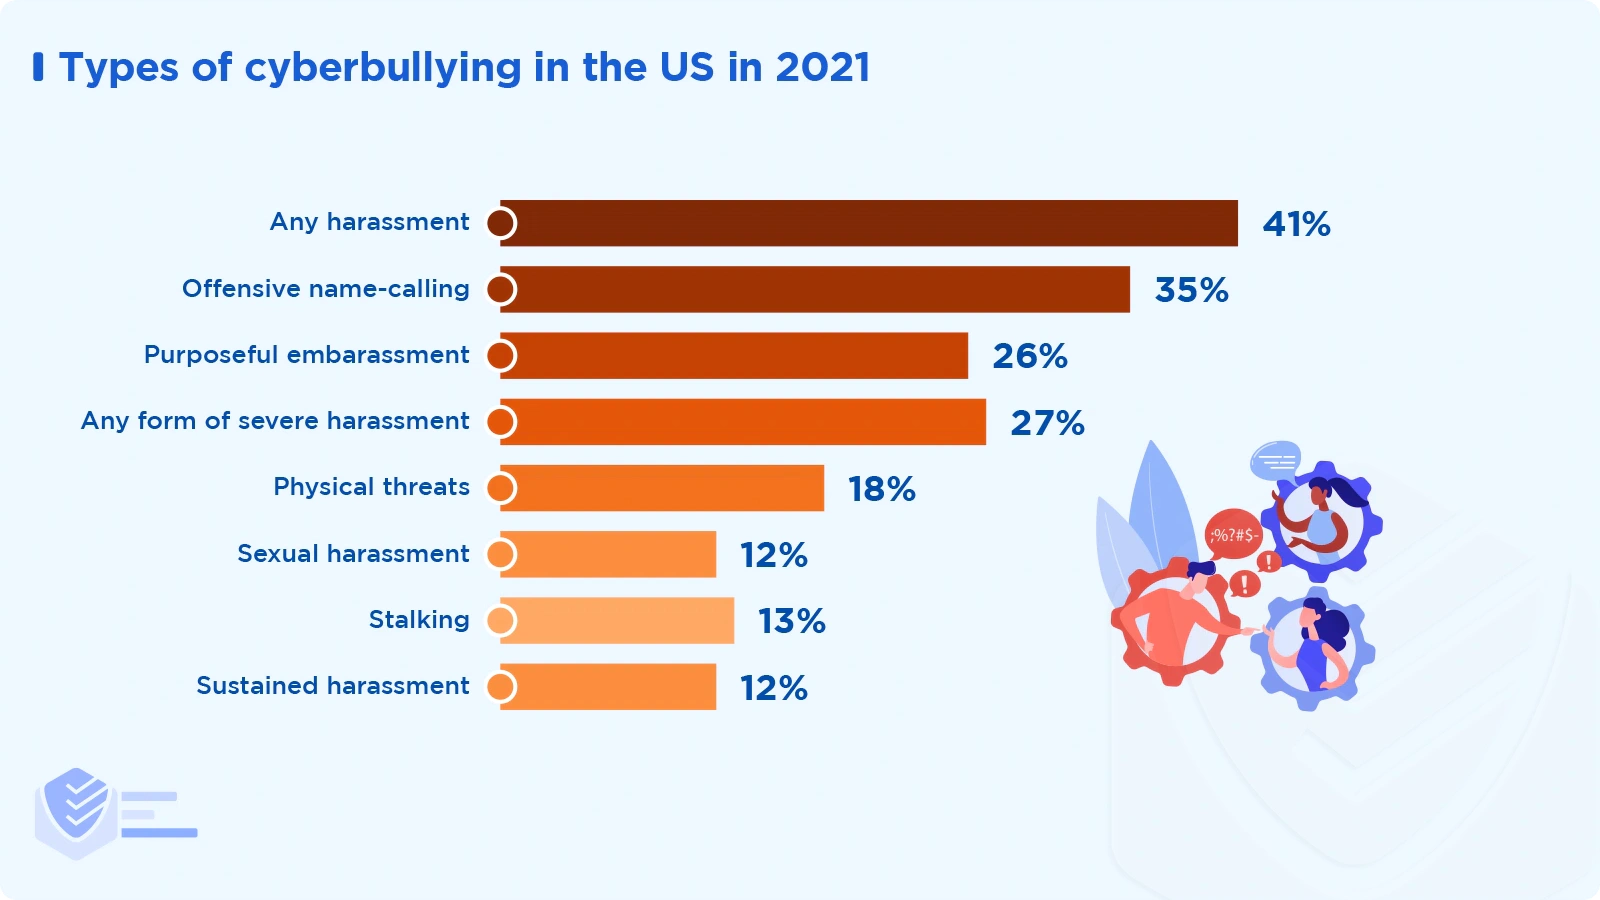 Types of cyberbullying in the US in 2021